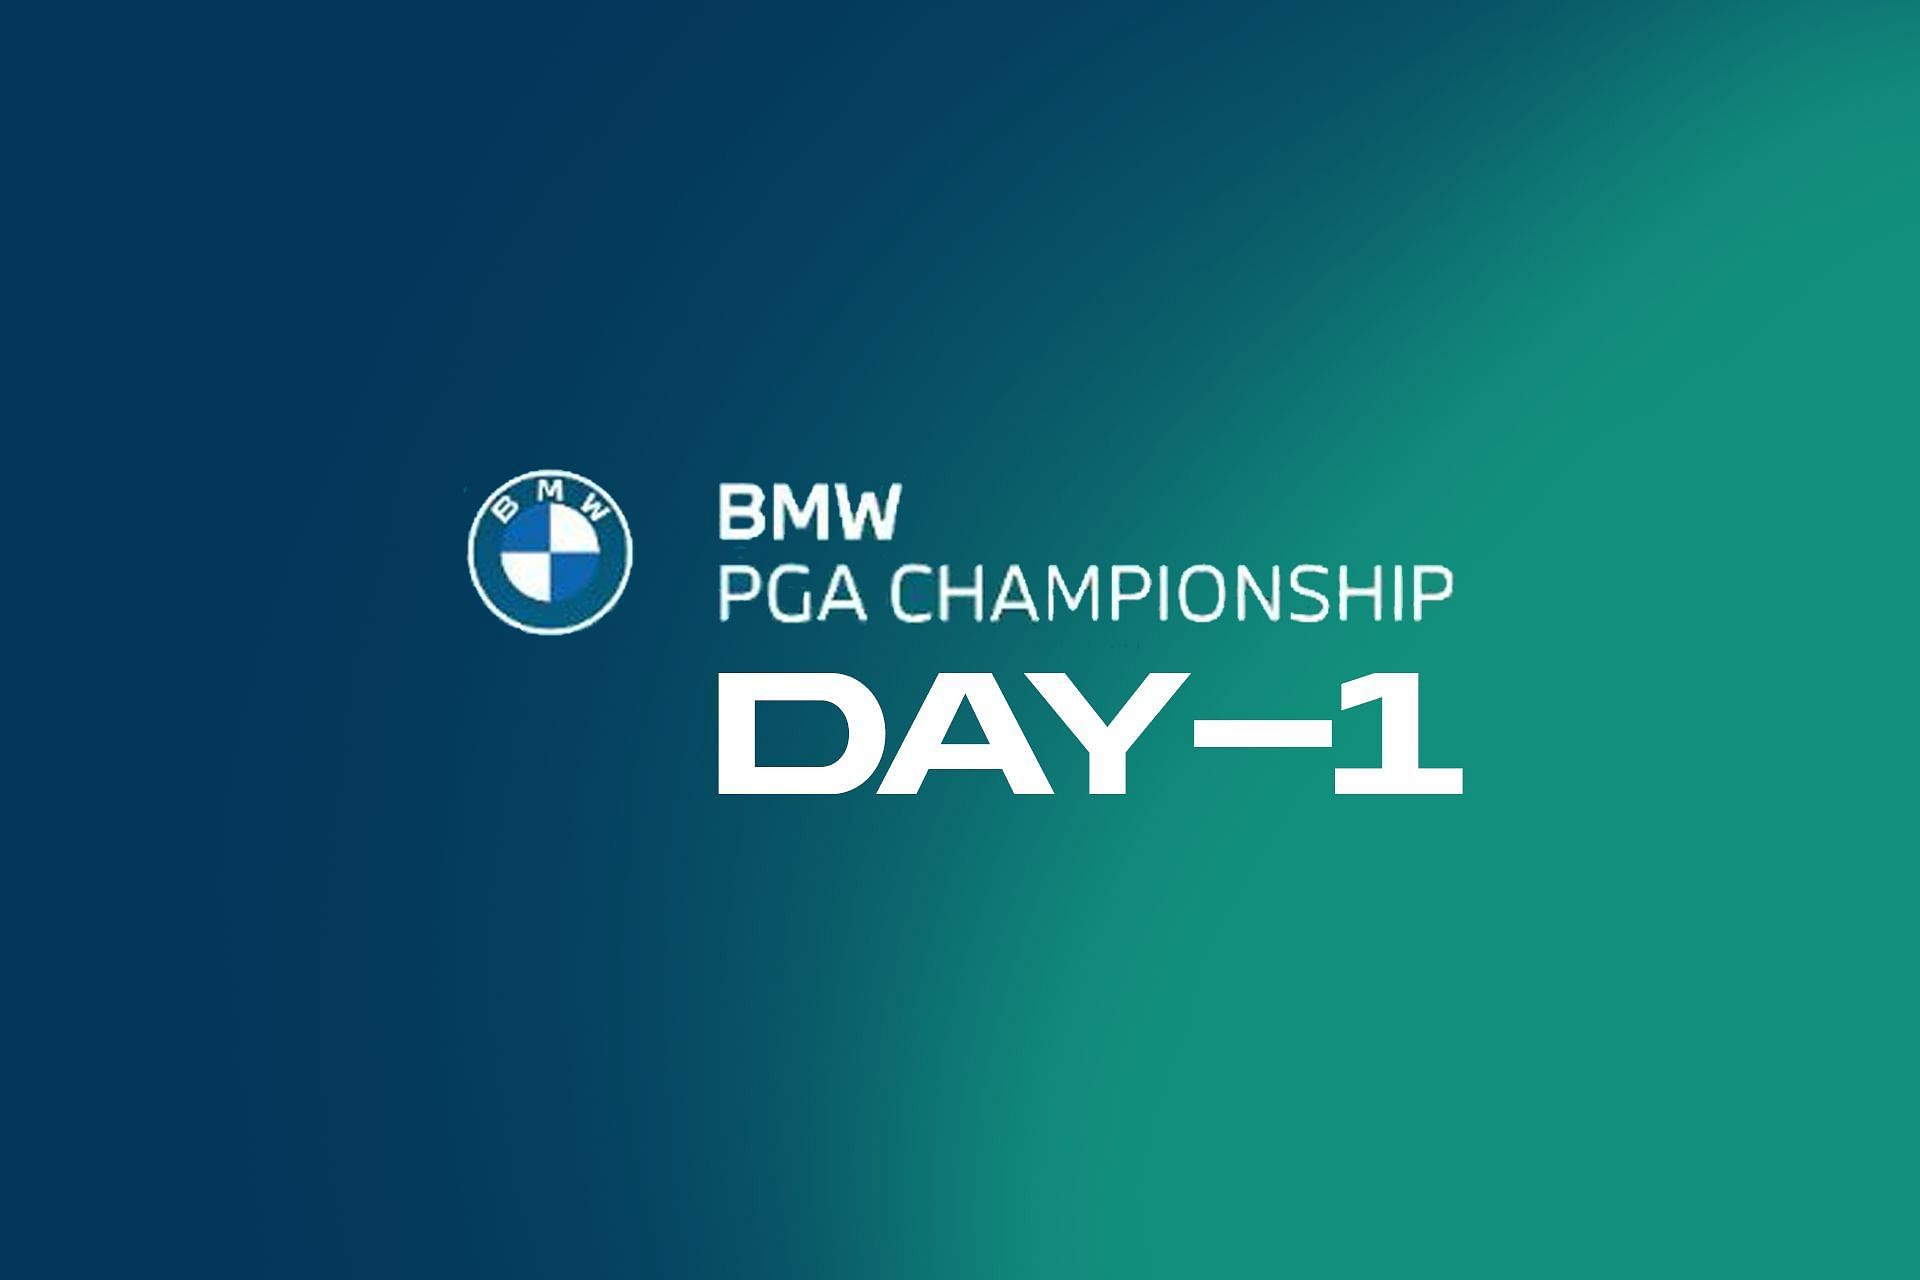 BMW PGA Championship 2022 Leaderboard after Day 1